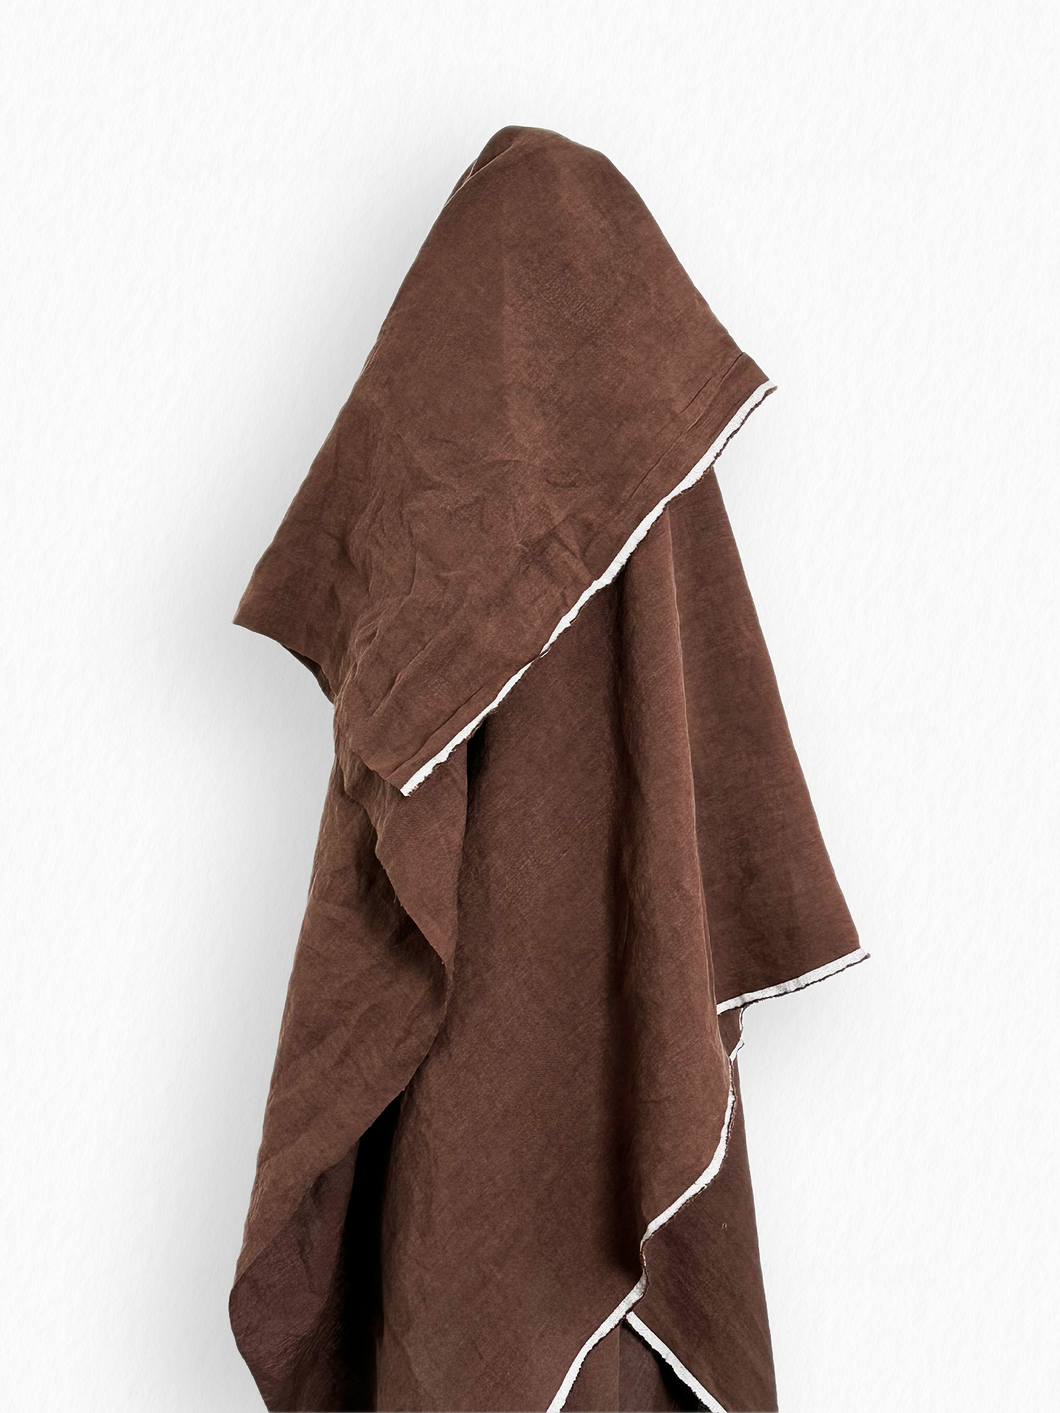 Chocolate Vintage Finish Piece Washed 100% Linen 180gsm $49pm